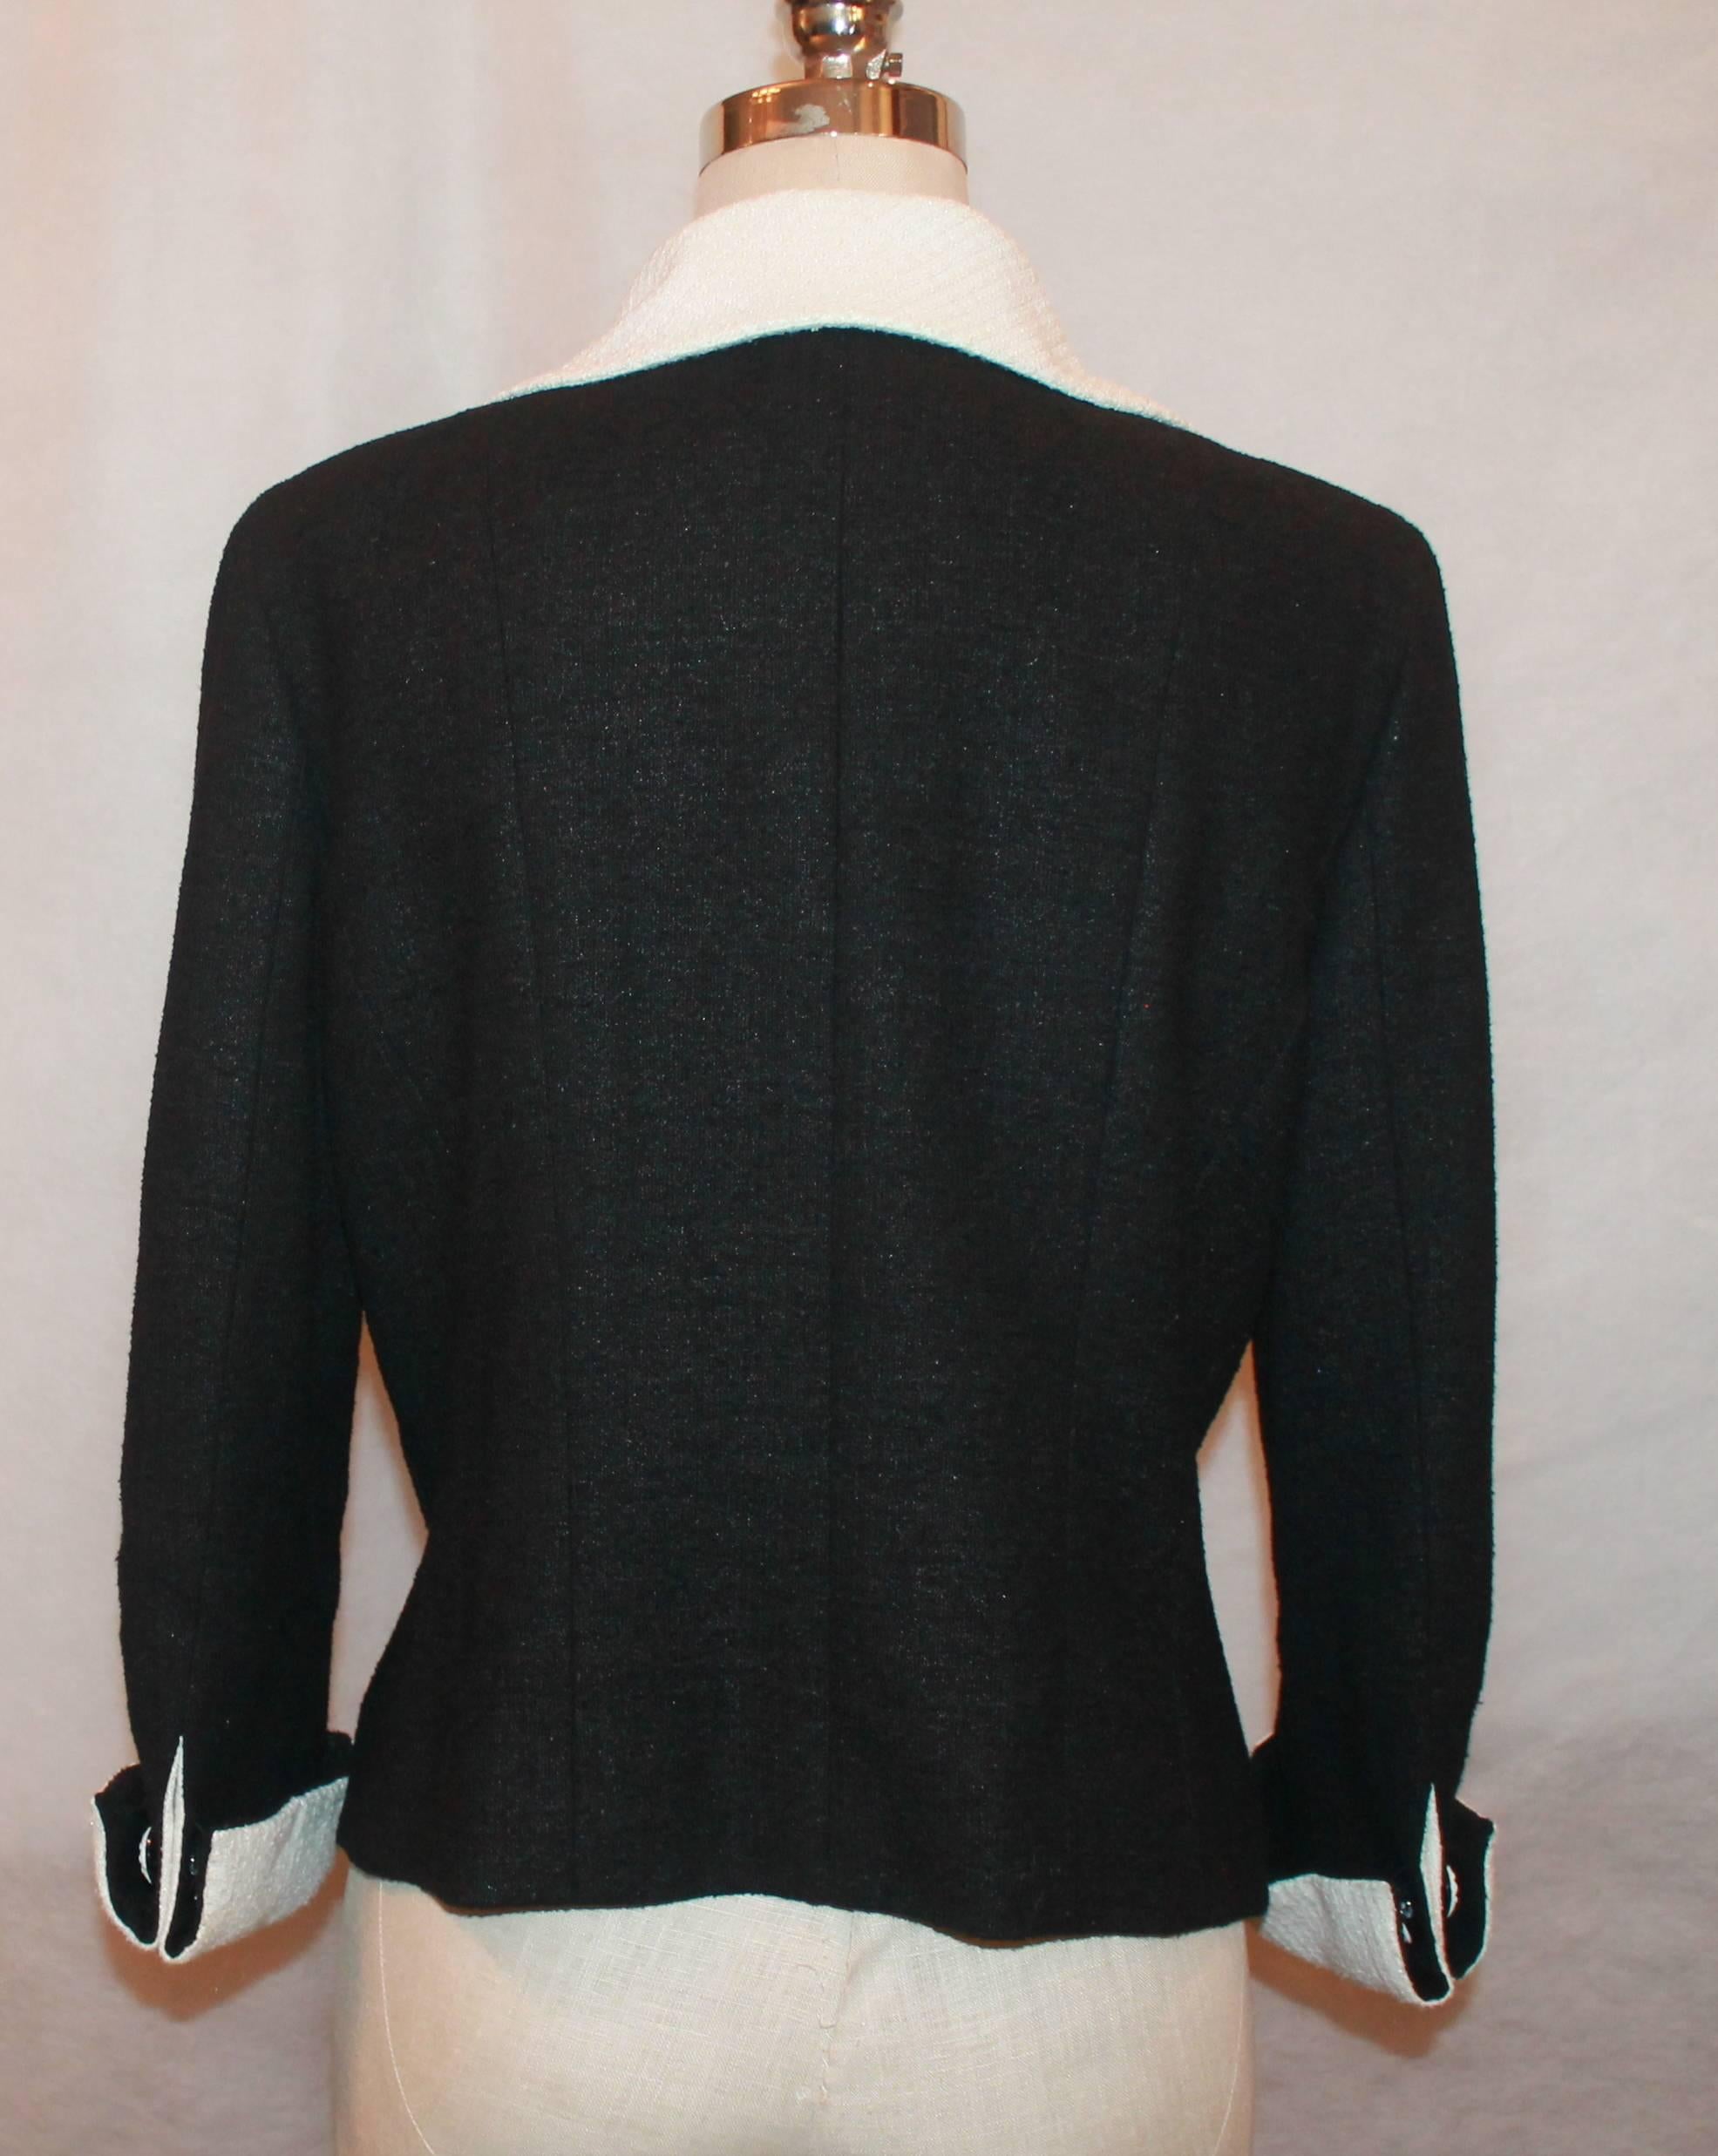 2009 Chanel Black Tweed Jacket w/ Ivory Collar and Cuff - 42 For Sale ...